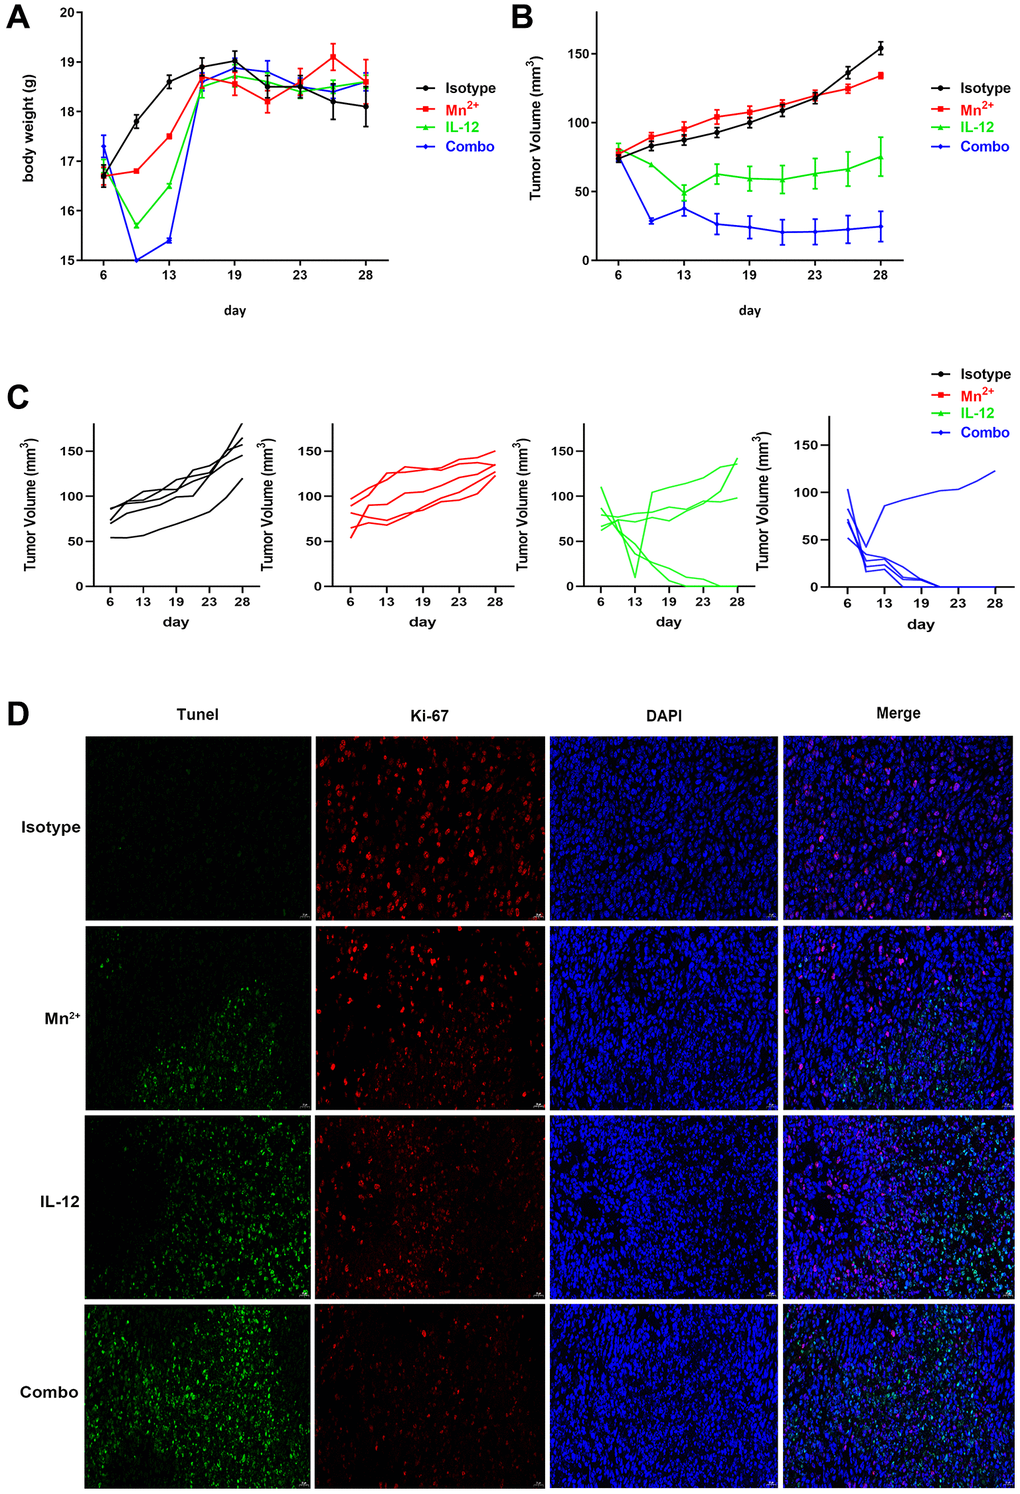 Potent antitumor effect of Mn2+ and IL-12 combination treatment. (A–C) Mice were subcutaneously inoculated with ID8 cells on day 0. Tumor-bearing mice were randomly divided into four groups: isotype control, Mn2+, IL-12, and a combination of Mn2+ and IL-12 (n = 5 mice per group). Treatment started on day 6. Body weight changes and tumor growth curves for each mouse are displayed. (D) Tumor tissues were fluorescently stained green, red, and blue to determine cell viability with TUNEL, with Ki-67, and to identify the nuclei, respectively (scale bar, 50 μm).